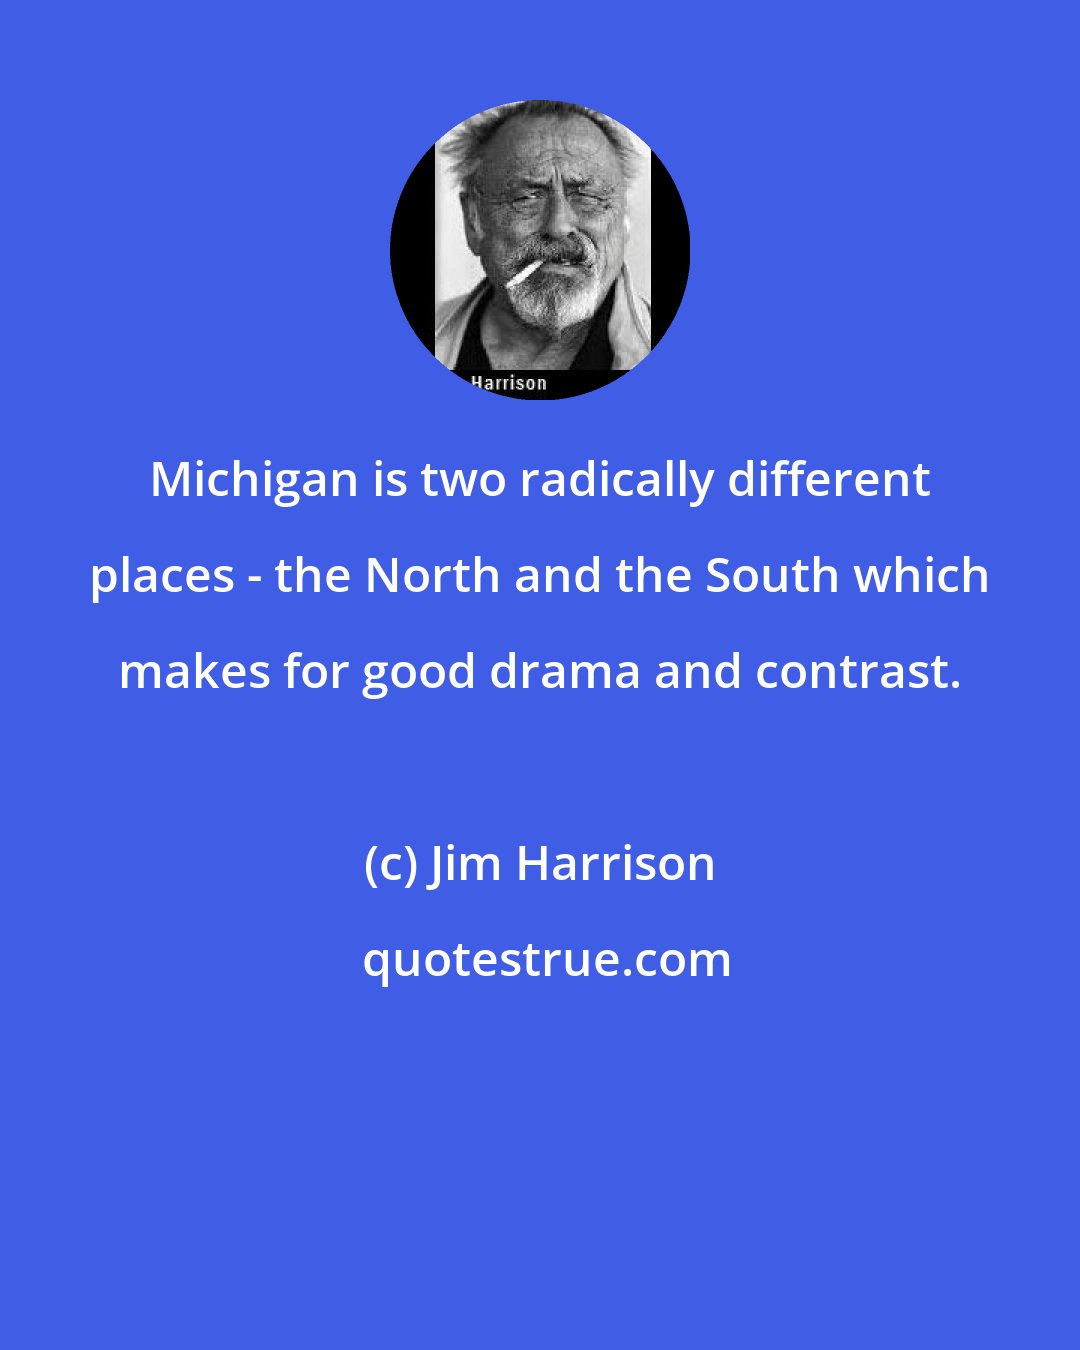 Jim Harrison: Michigan is two radically different places - the North and the South which makes for good drama and contrast.